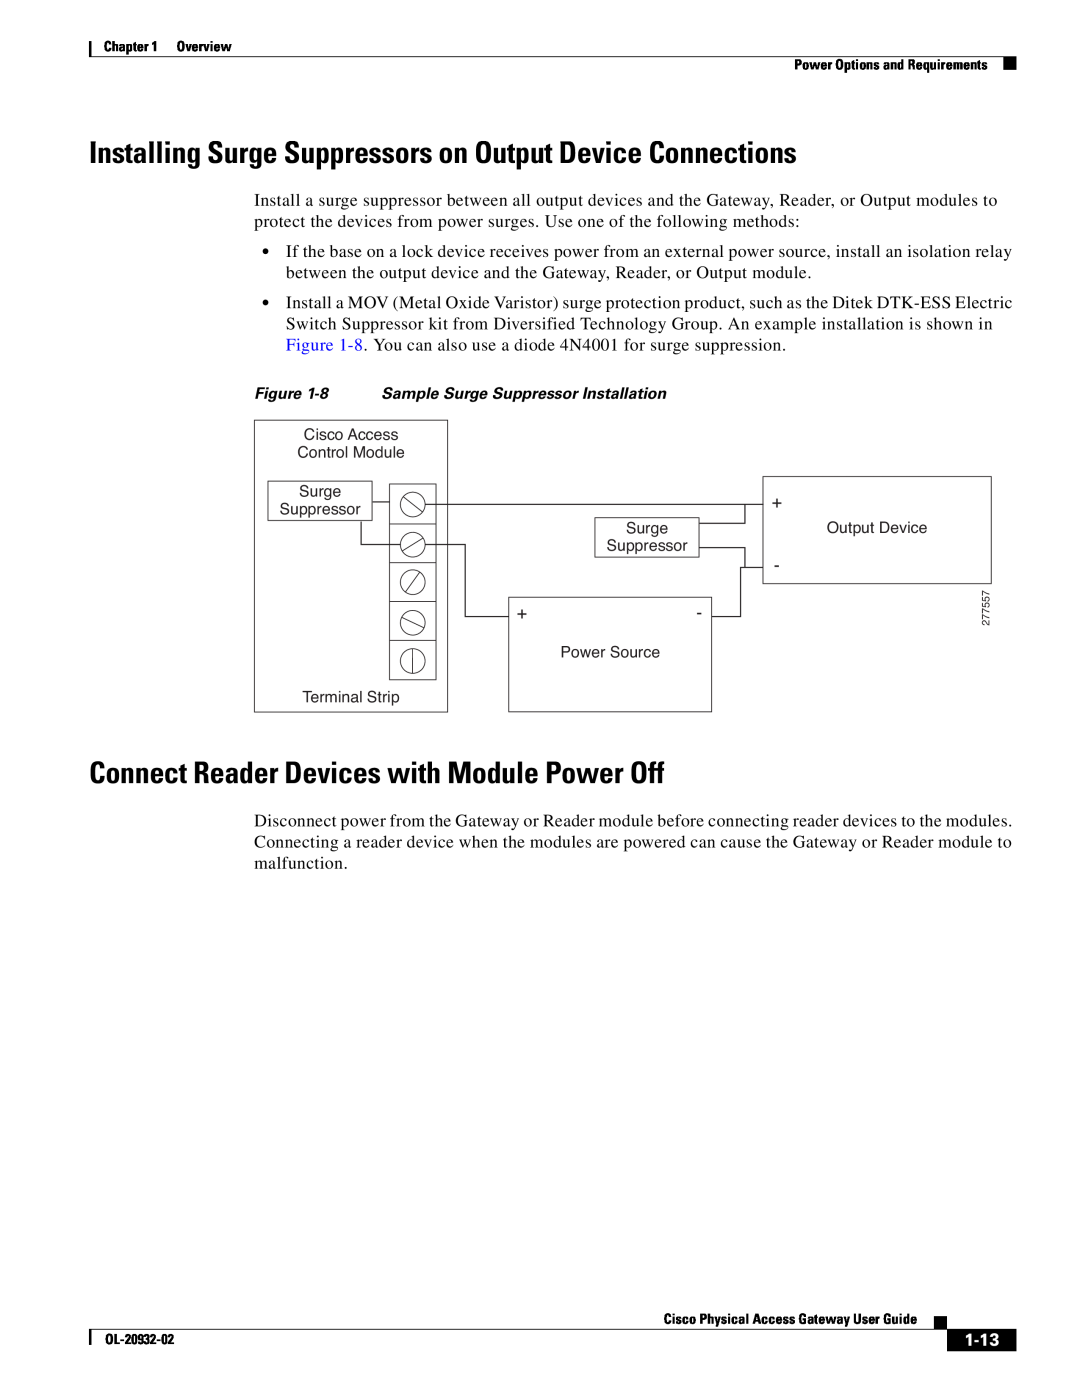 Cisco Systems OL-20932-02 manual Installing Surge Suppressors on Output Device Connections, 1-13 